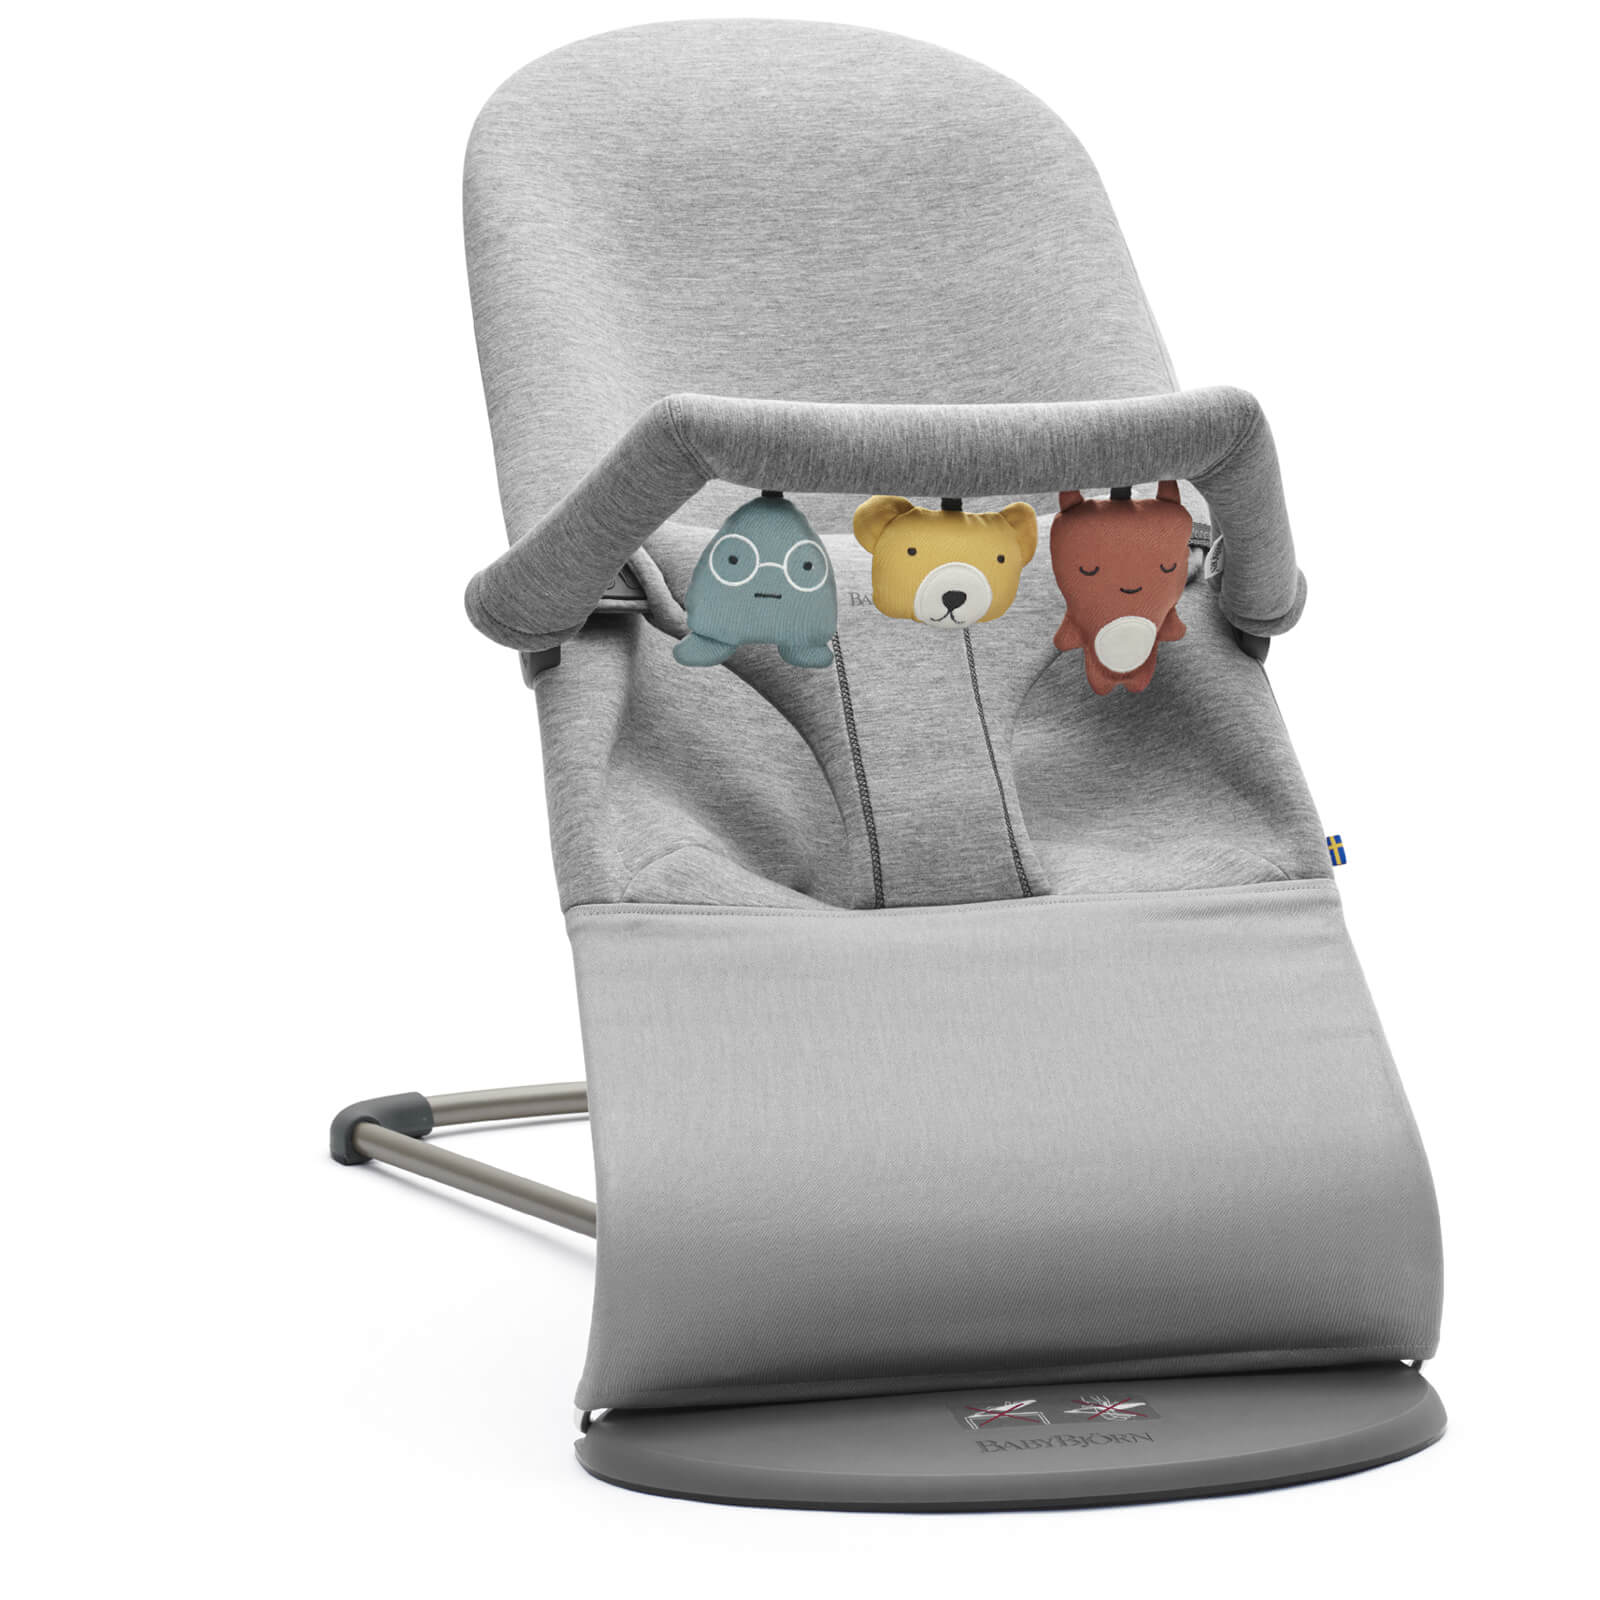 BABYBJORN Bouncer Bliss and Soft Friends Bouncer Toy - Light Grey